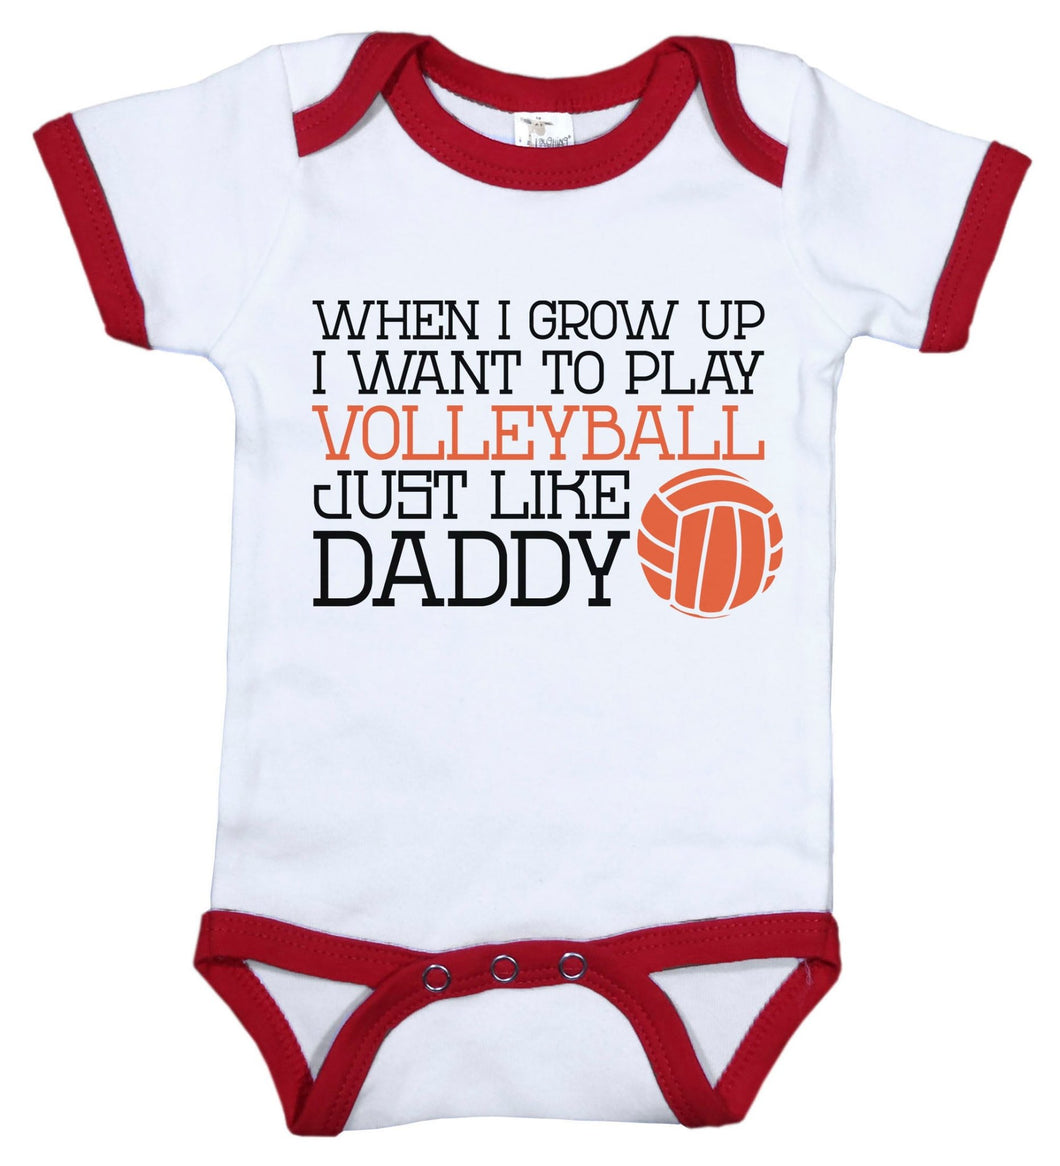 When I Grow Up I Want To Play Volleyball Just Like Daddy / Volleyball Ringer Onesie - Baffle